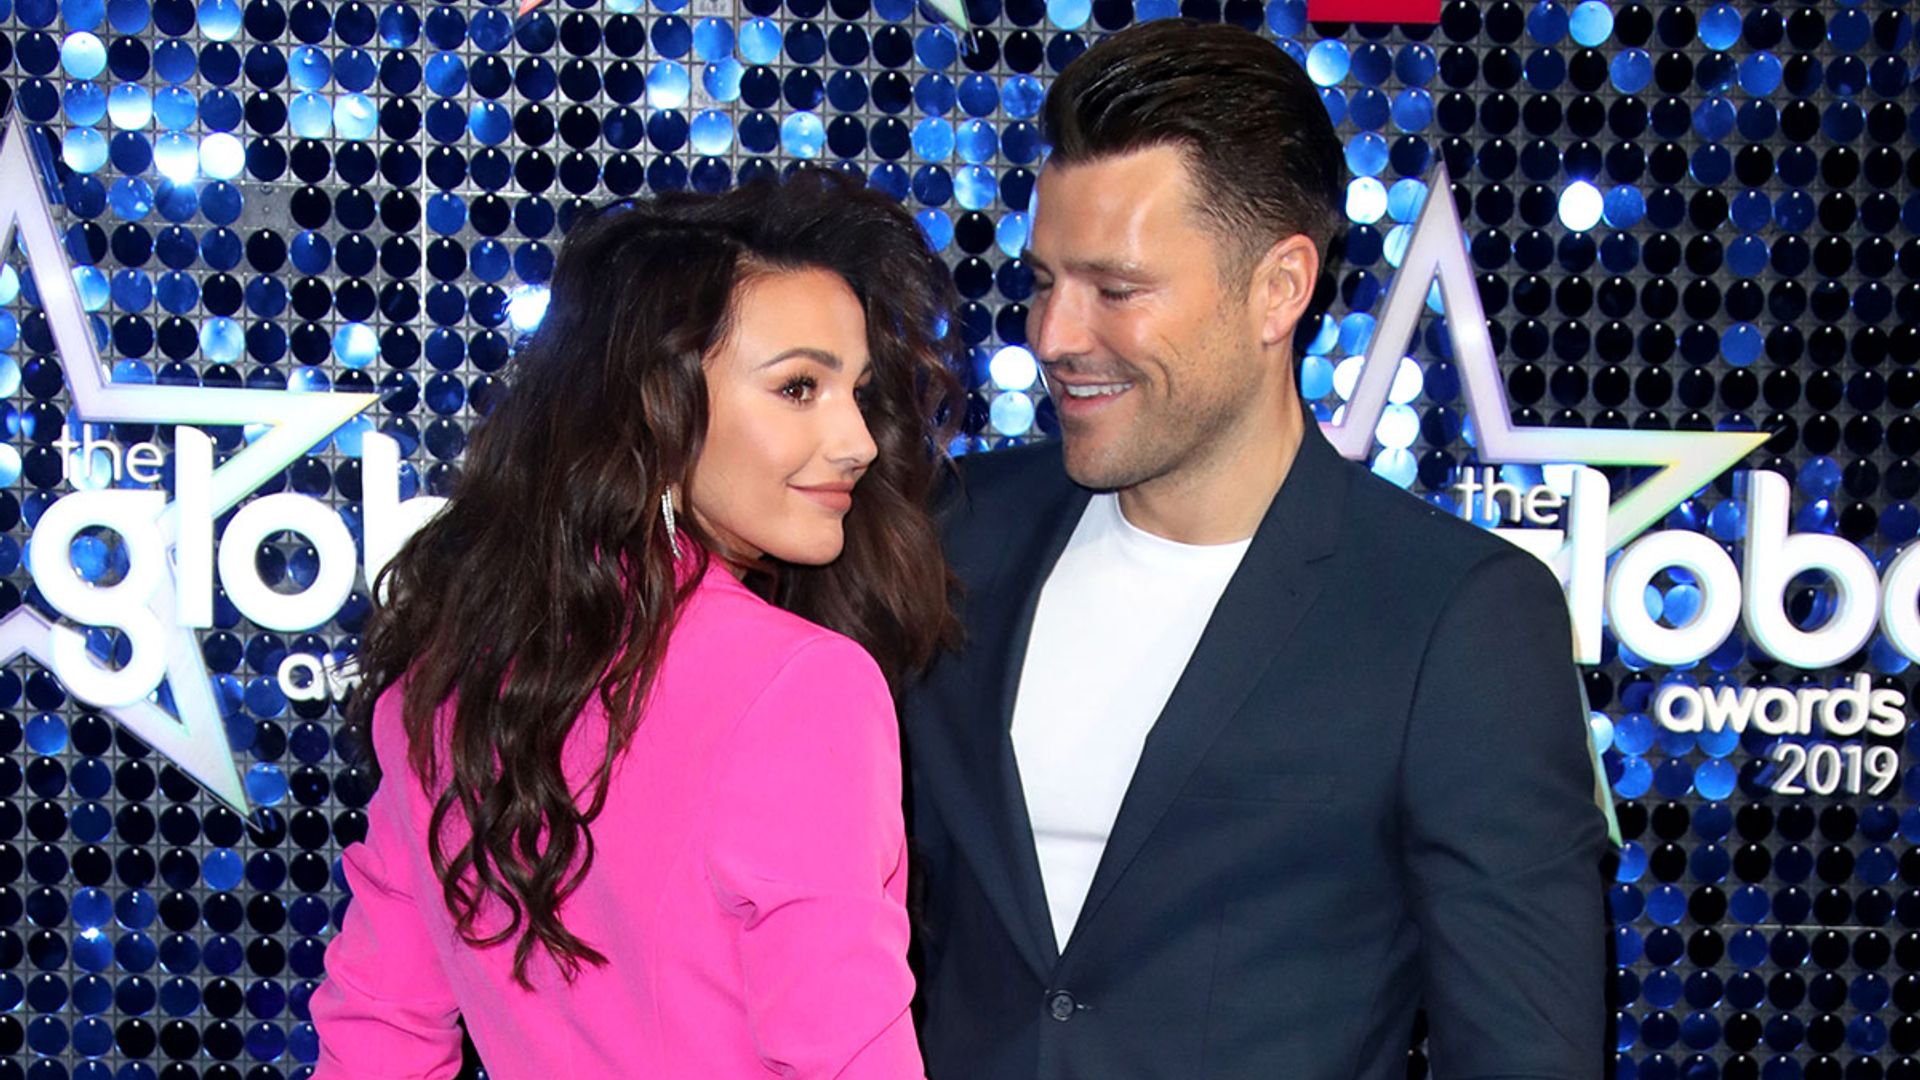 Why 2022 will be extra special for Michelle Keegan and Mark Wright